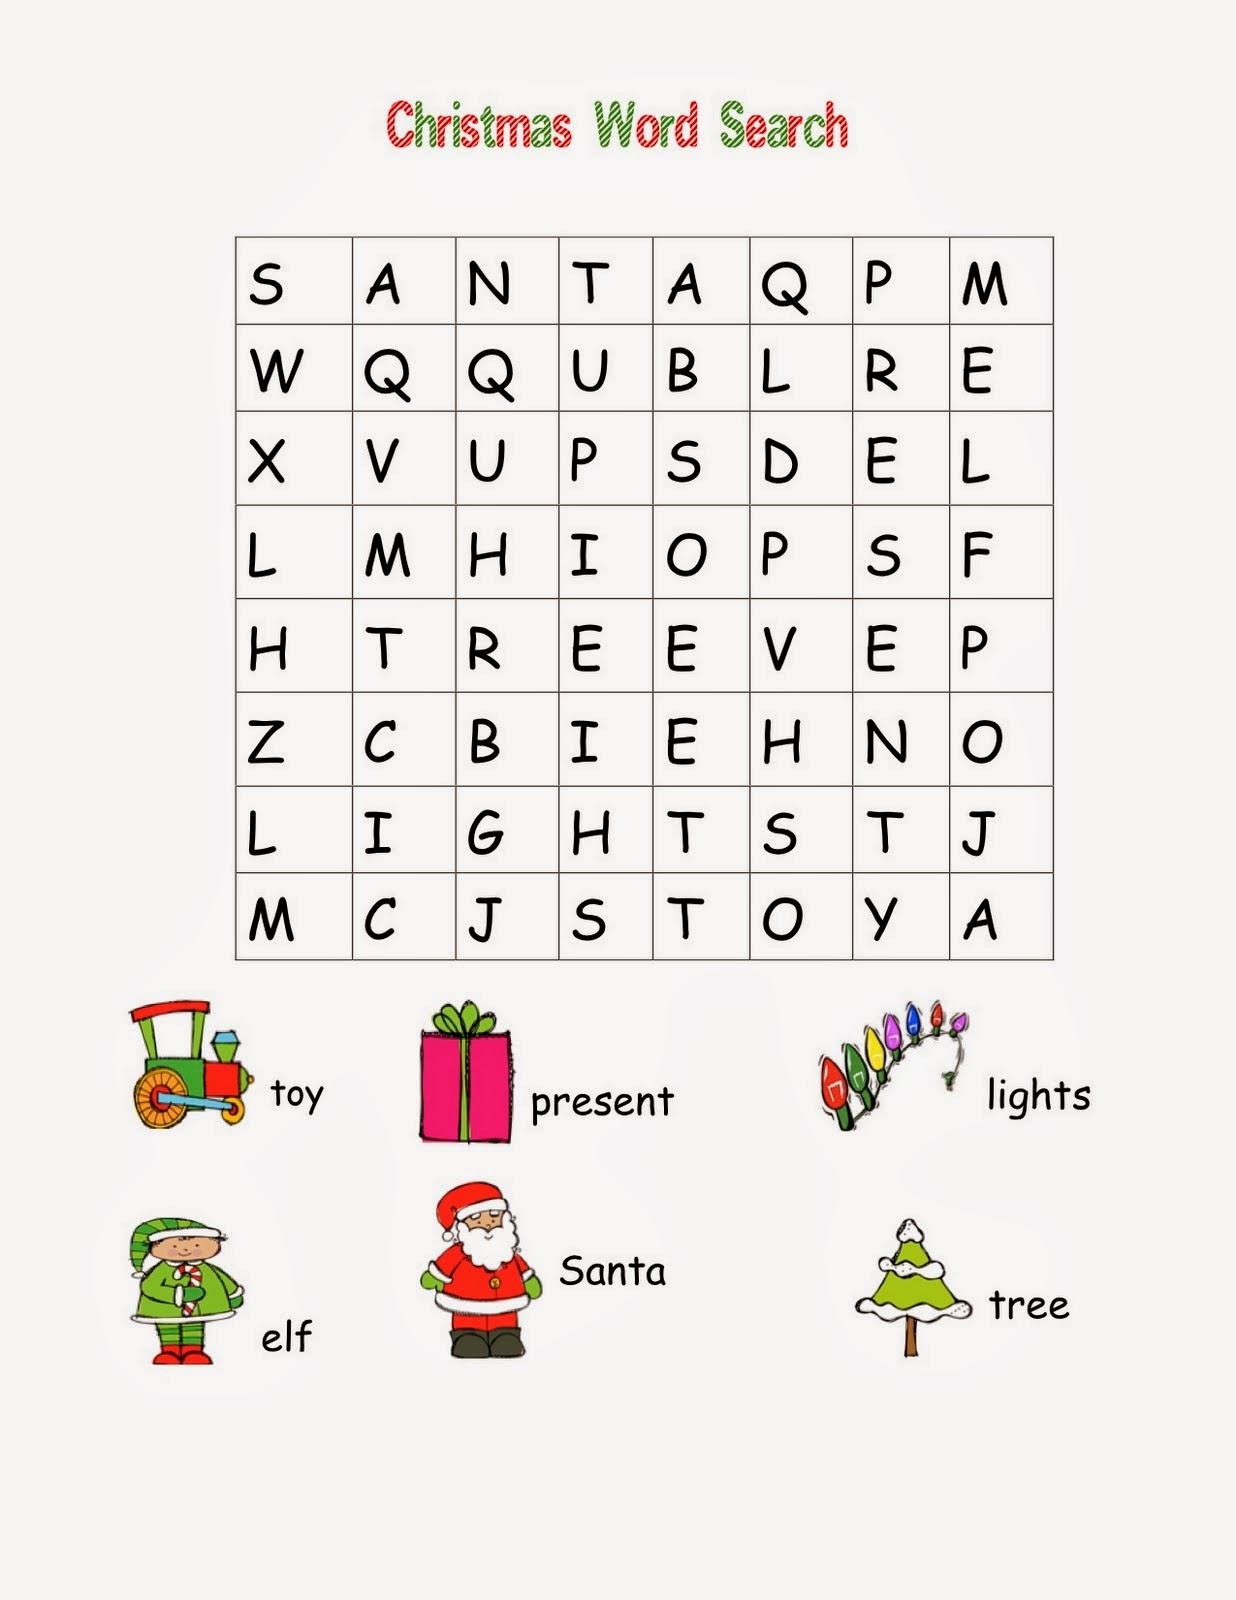 Easy Christmas Word Search - HD Wallpapers Blog